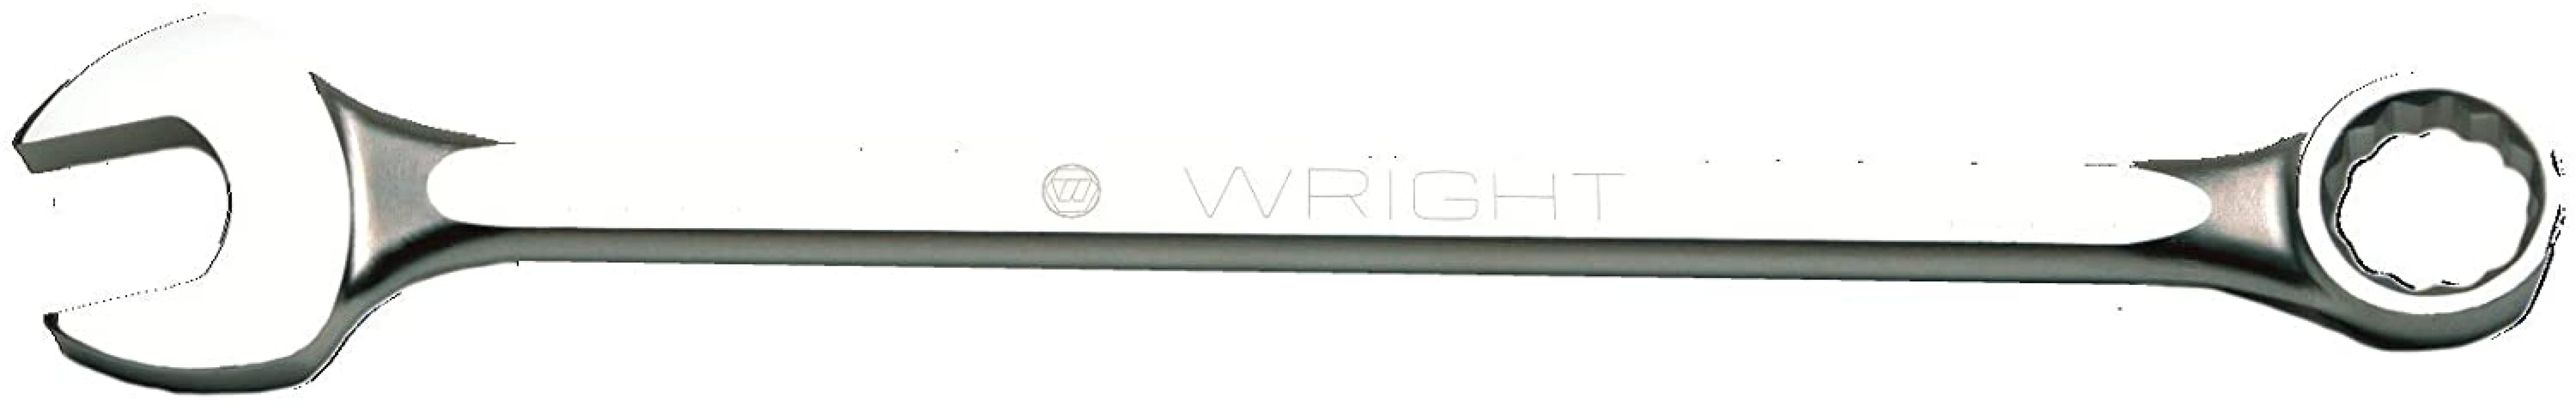 NEW Wright Tools 1152 1-11/16" Wright Grip 12 Point Combination Wrench USA